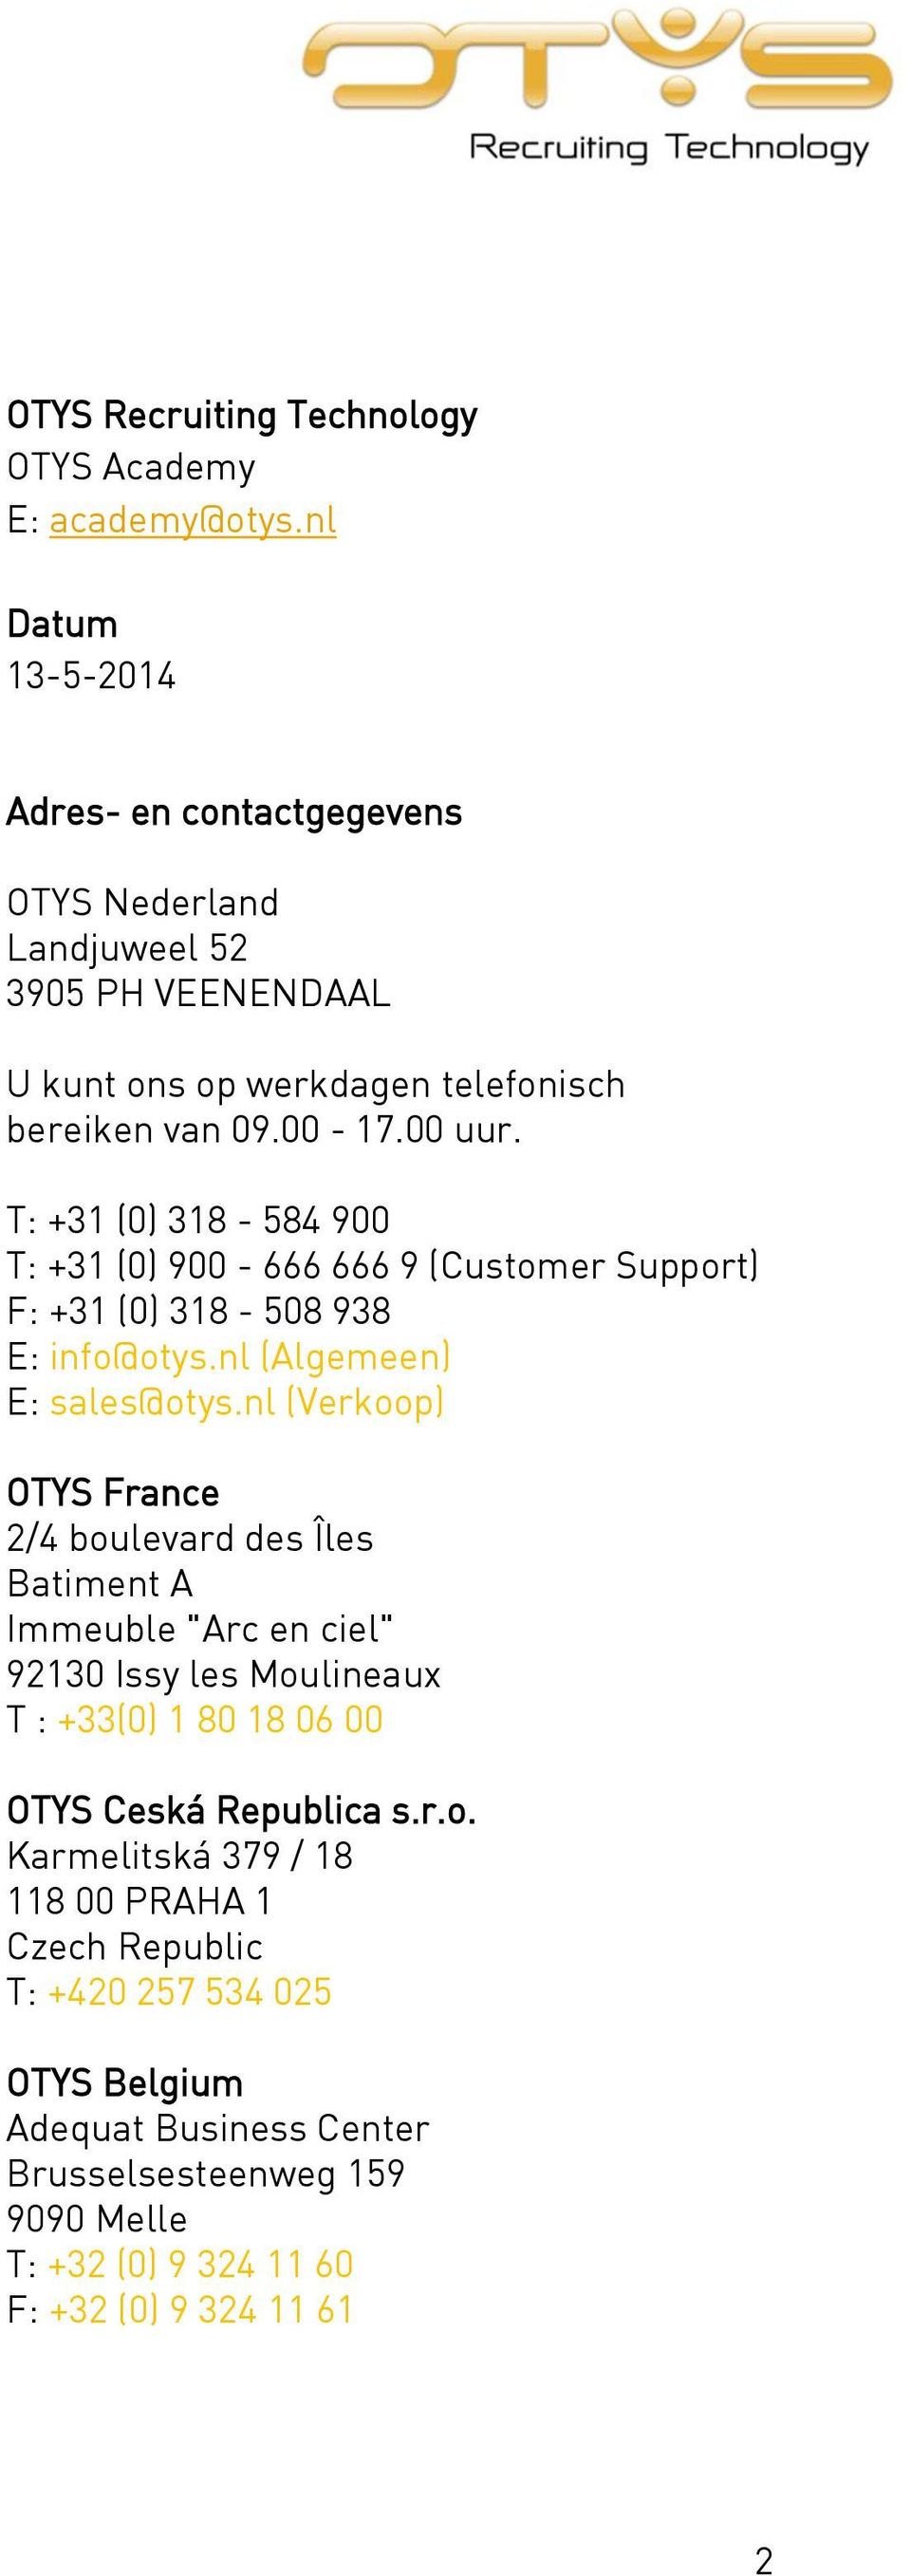 T: +31 (0) 318-584 900 T: +31 (0) 900-666 666 9 (Customer Support) F: +31 (0) 318-508 938 E: info@otys.nl (Algemeen) E: sales@otys.